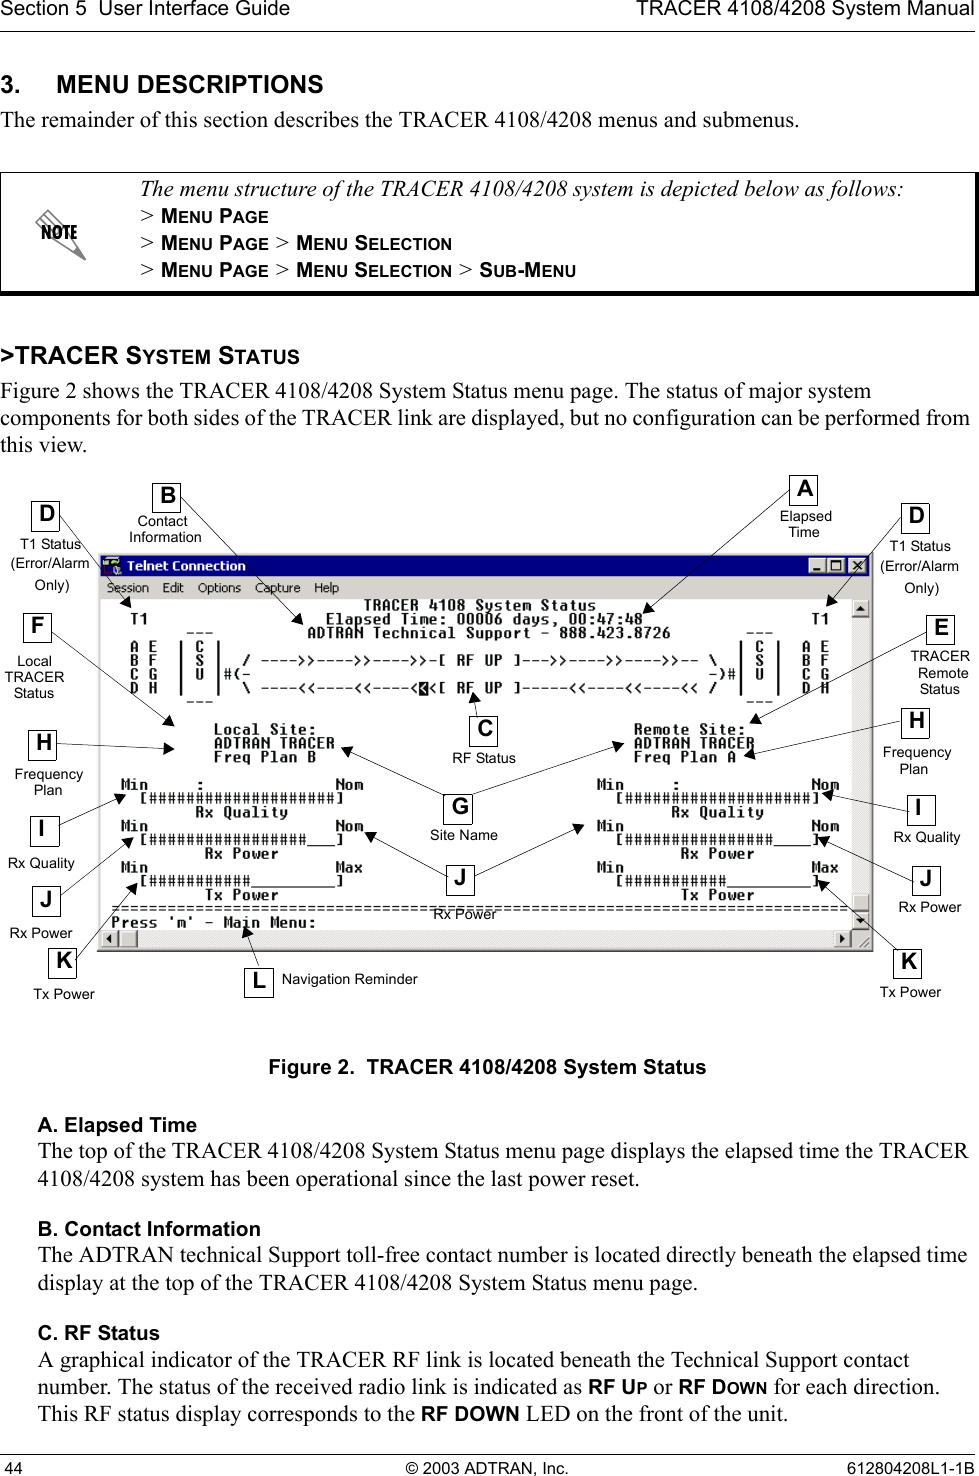 Section 5  User Interface Guide TRACER 4108/4208 System Manual 44 © 2003 ADTRAN, Inc. 612804208L1-1B3. MENU DESCRIPTIONSThe remainder of this section describes the TRACER 4108/4208 menus and submenus. &gt;TRACER SYSTEM STATUSFigure 2 shows the TRACER 4108/4208 System Status menu page. The status of major system components for both sides of the TRACER link are displayed, but no configuration can be performed from this view.Figure 2.  TRACER 4108/4208 System StatusA. Elapsed TimeThe top of the TRACER 4108/4208 System Status menu page displays the elapsed time the TRACER 4108/4208 system has been operational since the last power reset.B. Contact InformationThe ADTRAN technical Support toll-free contact number is located directly beneath the elapsed time display at the top of the TRACER 4108/4208 System Status menu page.C. RF StatusA graphical indicator of the TRACER RF link is located beneath the Technical Support contact number. The status of the received radio link is indicated as RF UP or RF DOWN for each direction. This RF status display corresponds to the RF DOWN LED on the front of the unit.The menu structure of the TRACER 4108/4208 system is depicted below as follows:&gt; MENU PAGE&gt; MENU PAGE &gt; MENU SELECTION&gt; MENU PAGE &gt; MENU SELECTION &gt; SUB-MENUAElapsedTimeBContactInformationFLocalHFrequencyIRx PowerCRF StatusGDT1 StatusERemoteHIRx QualityKTx PowerJTx PowerKNavigation Reminder(Error/AlarmOnly)TRACERStatusPlanFrequencyPlanTRACERStatusSite NameDT1 Status(Error/AlarmOnly)LRx Quality JRx PowerJRx Power